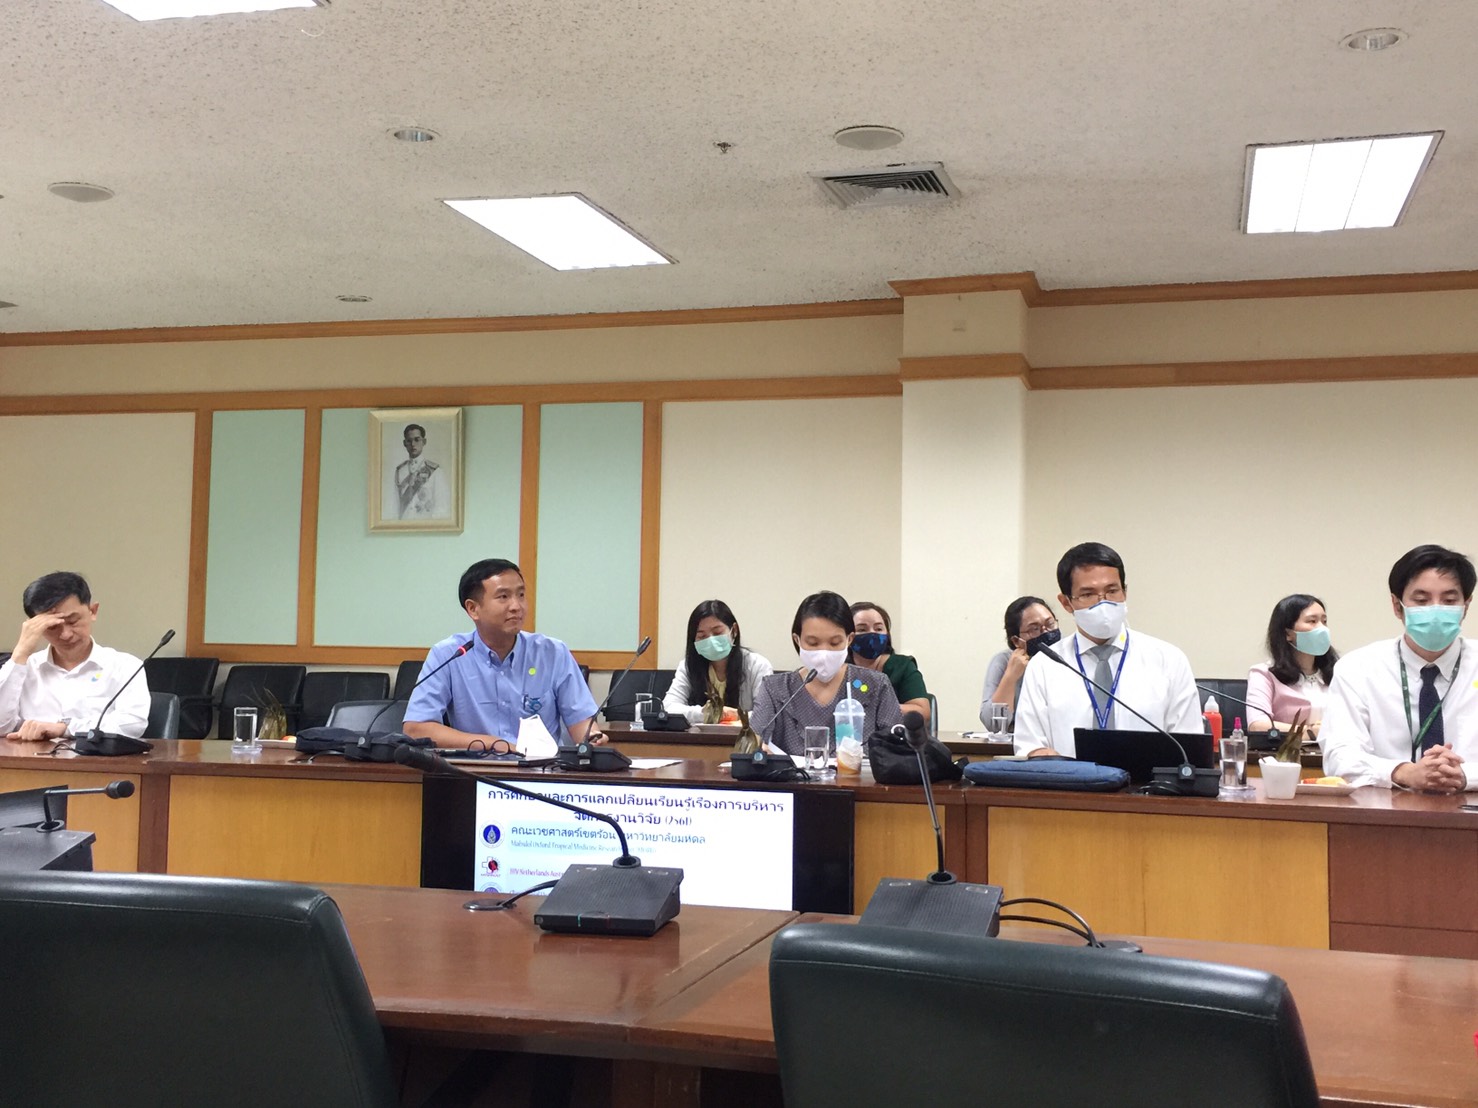 Meeting with the Research Management and Development Division, Mahidol University.